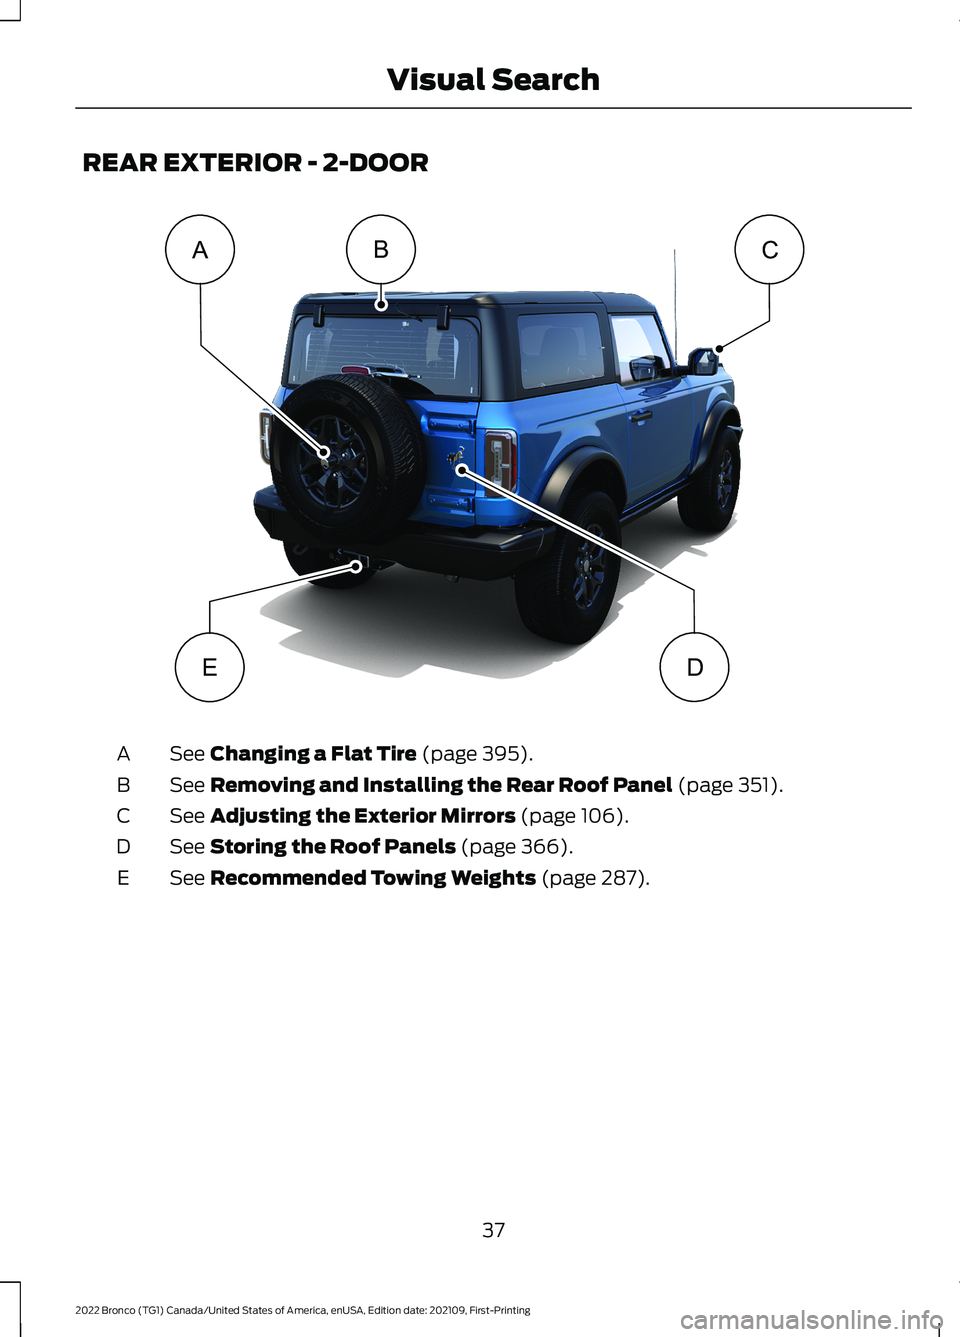 FORD BRONCO 2022  Owners Manual REAR EXTERIOR - 2-DOOR
See Changing a Flat Tire (page 395).A
See Removing and Installing the Rear Roof Panel (page 351).B
See Adjusting the Exterior Mirrors (page 106).C
See Storing the Roof Panels (p